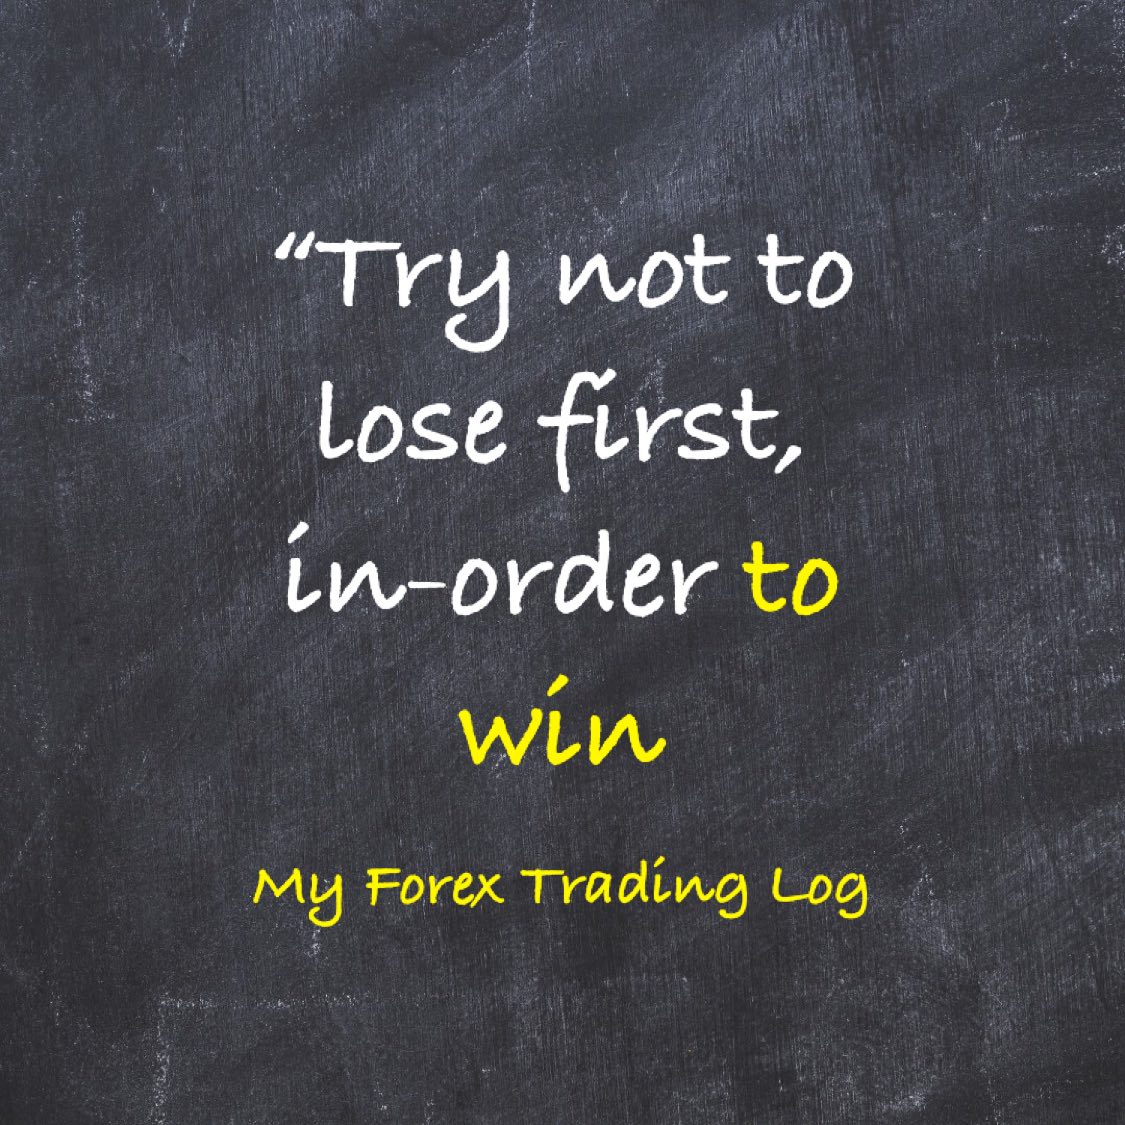 forex trading for beginners Lesson 1. Try not to loose first in-order to win